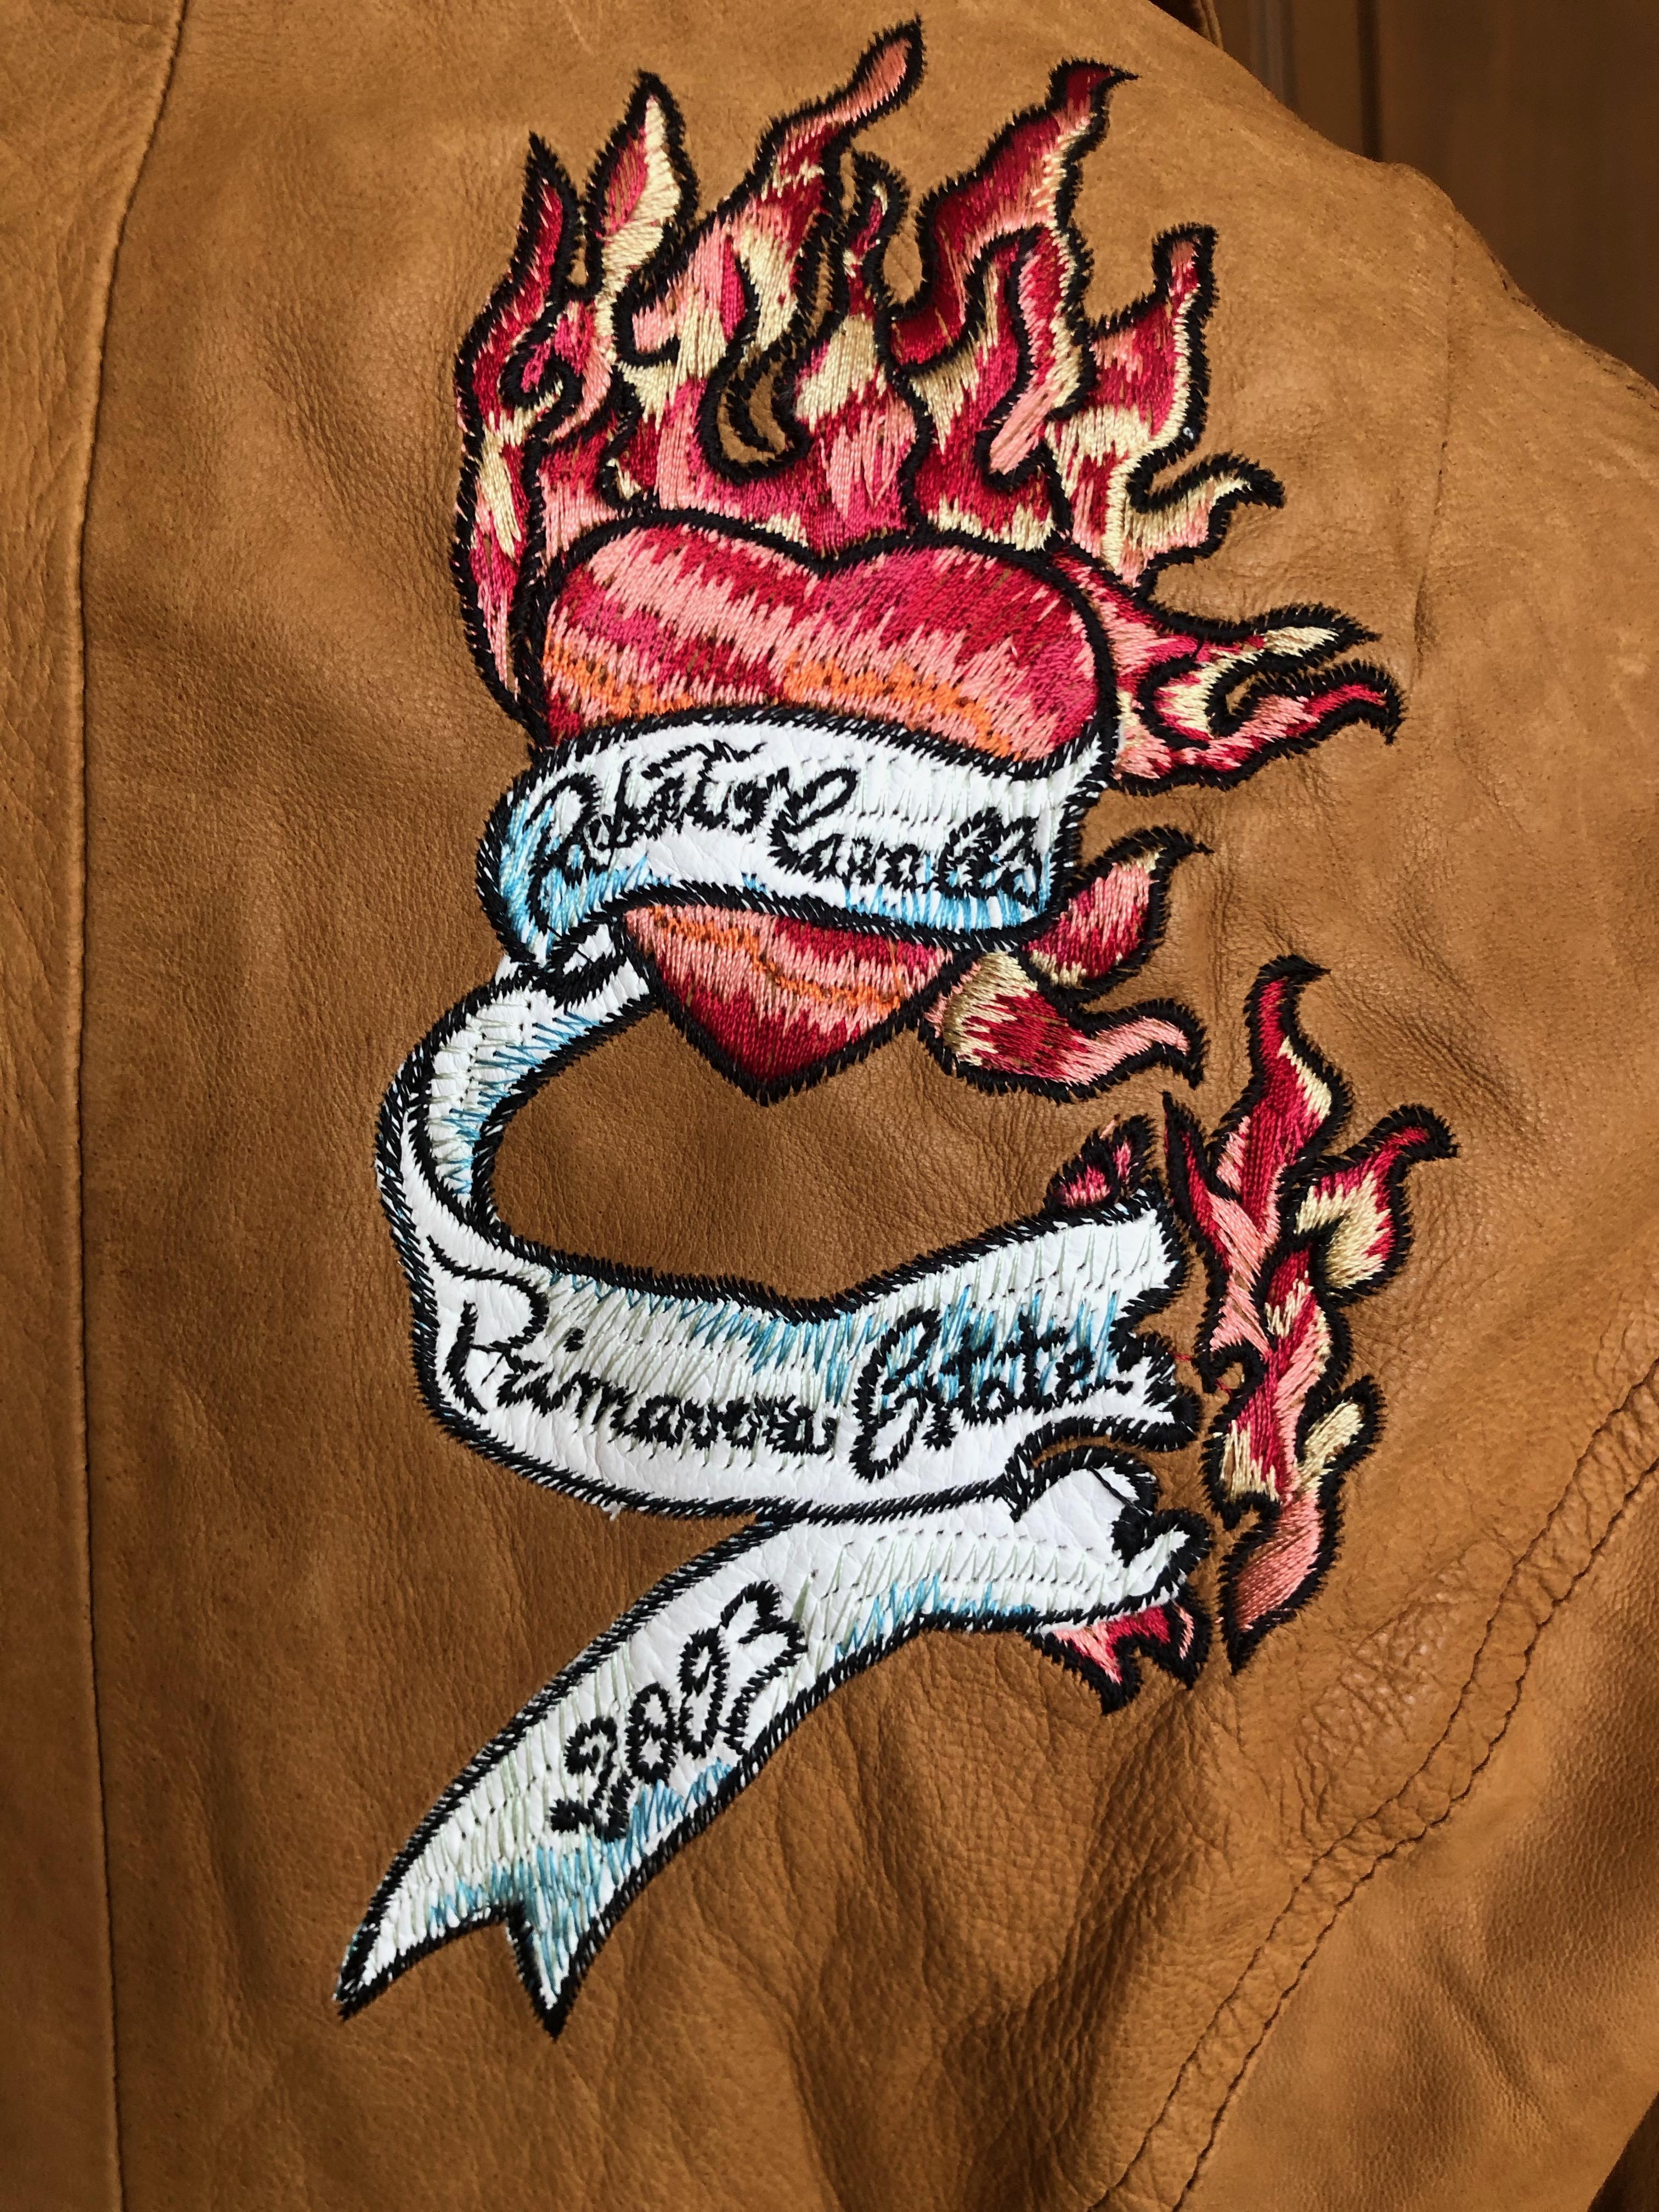 Women's or Men's Roberto Cavalli Collectable Leather Jacket with Tattoo Embroidery 2003 For Sale